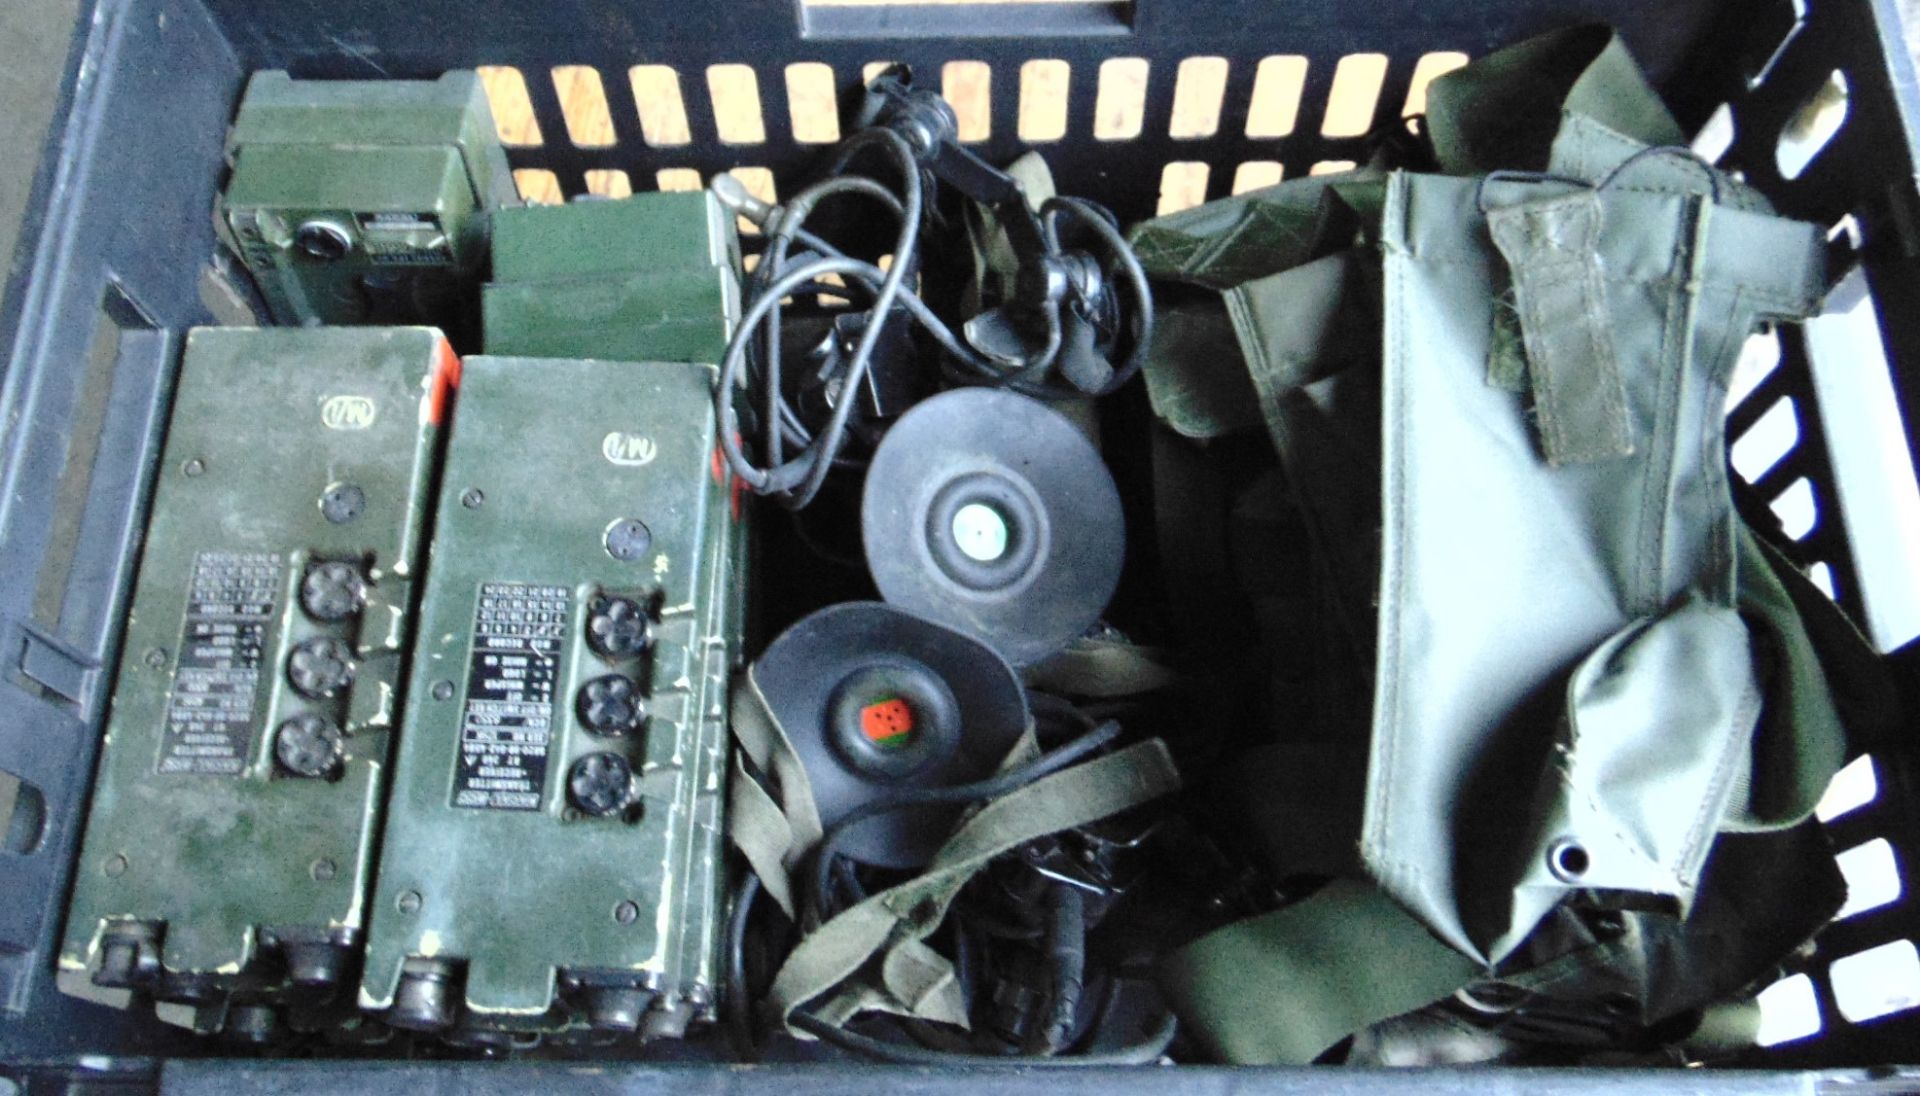 10 x Clansman UK RT 349 Transmitters Receivers w/ Headsets, Pouches, Battery Packs - Image 2 of 4